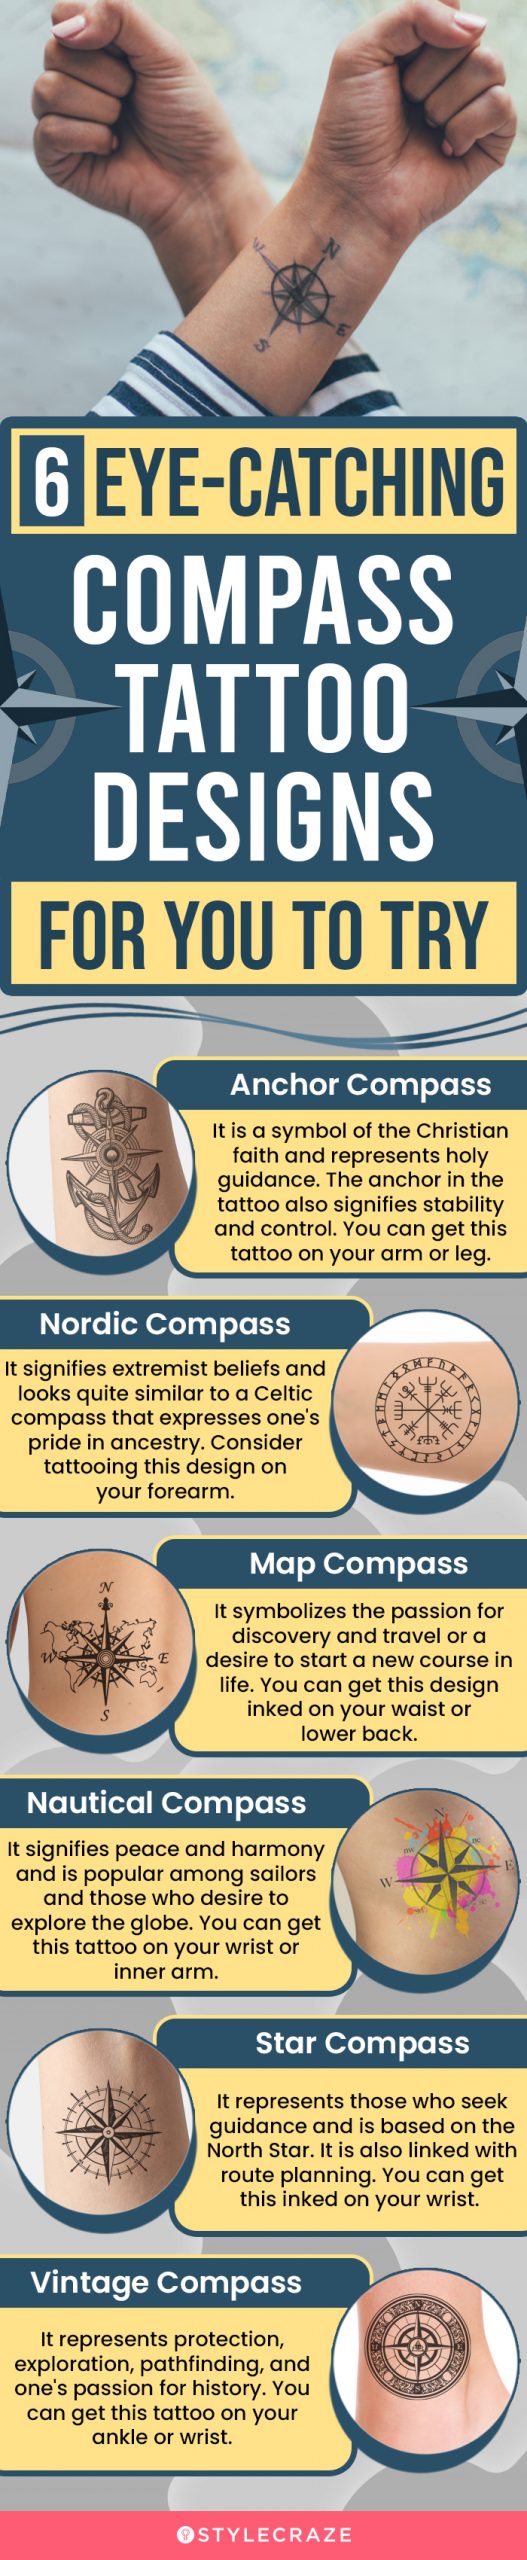 6 eyecatching compass tattoo designs for you to try (infographic)